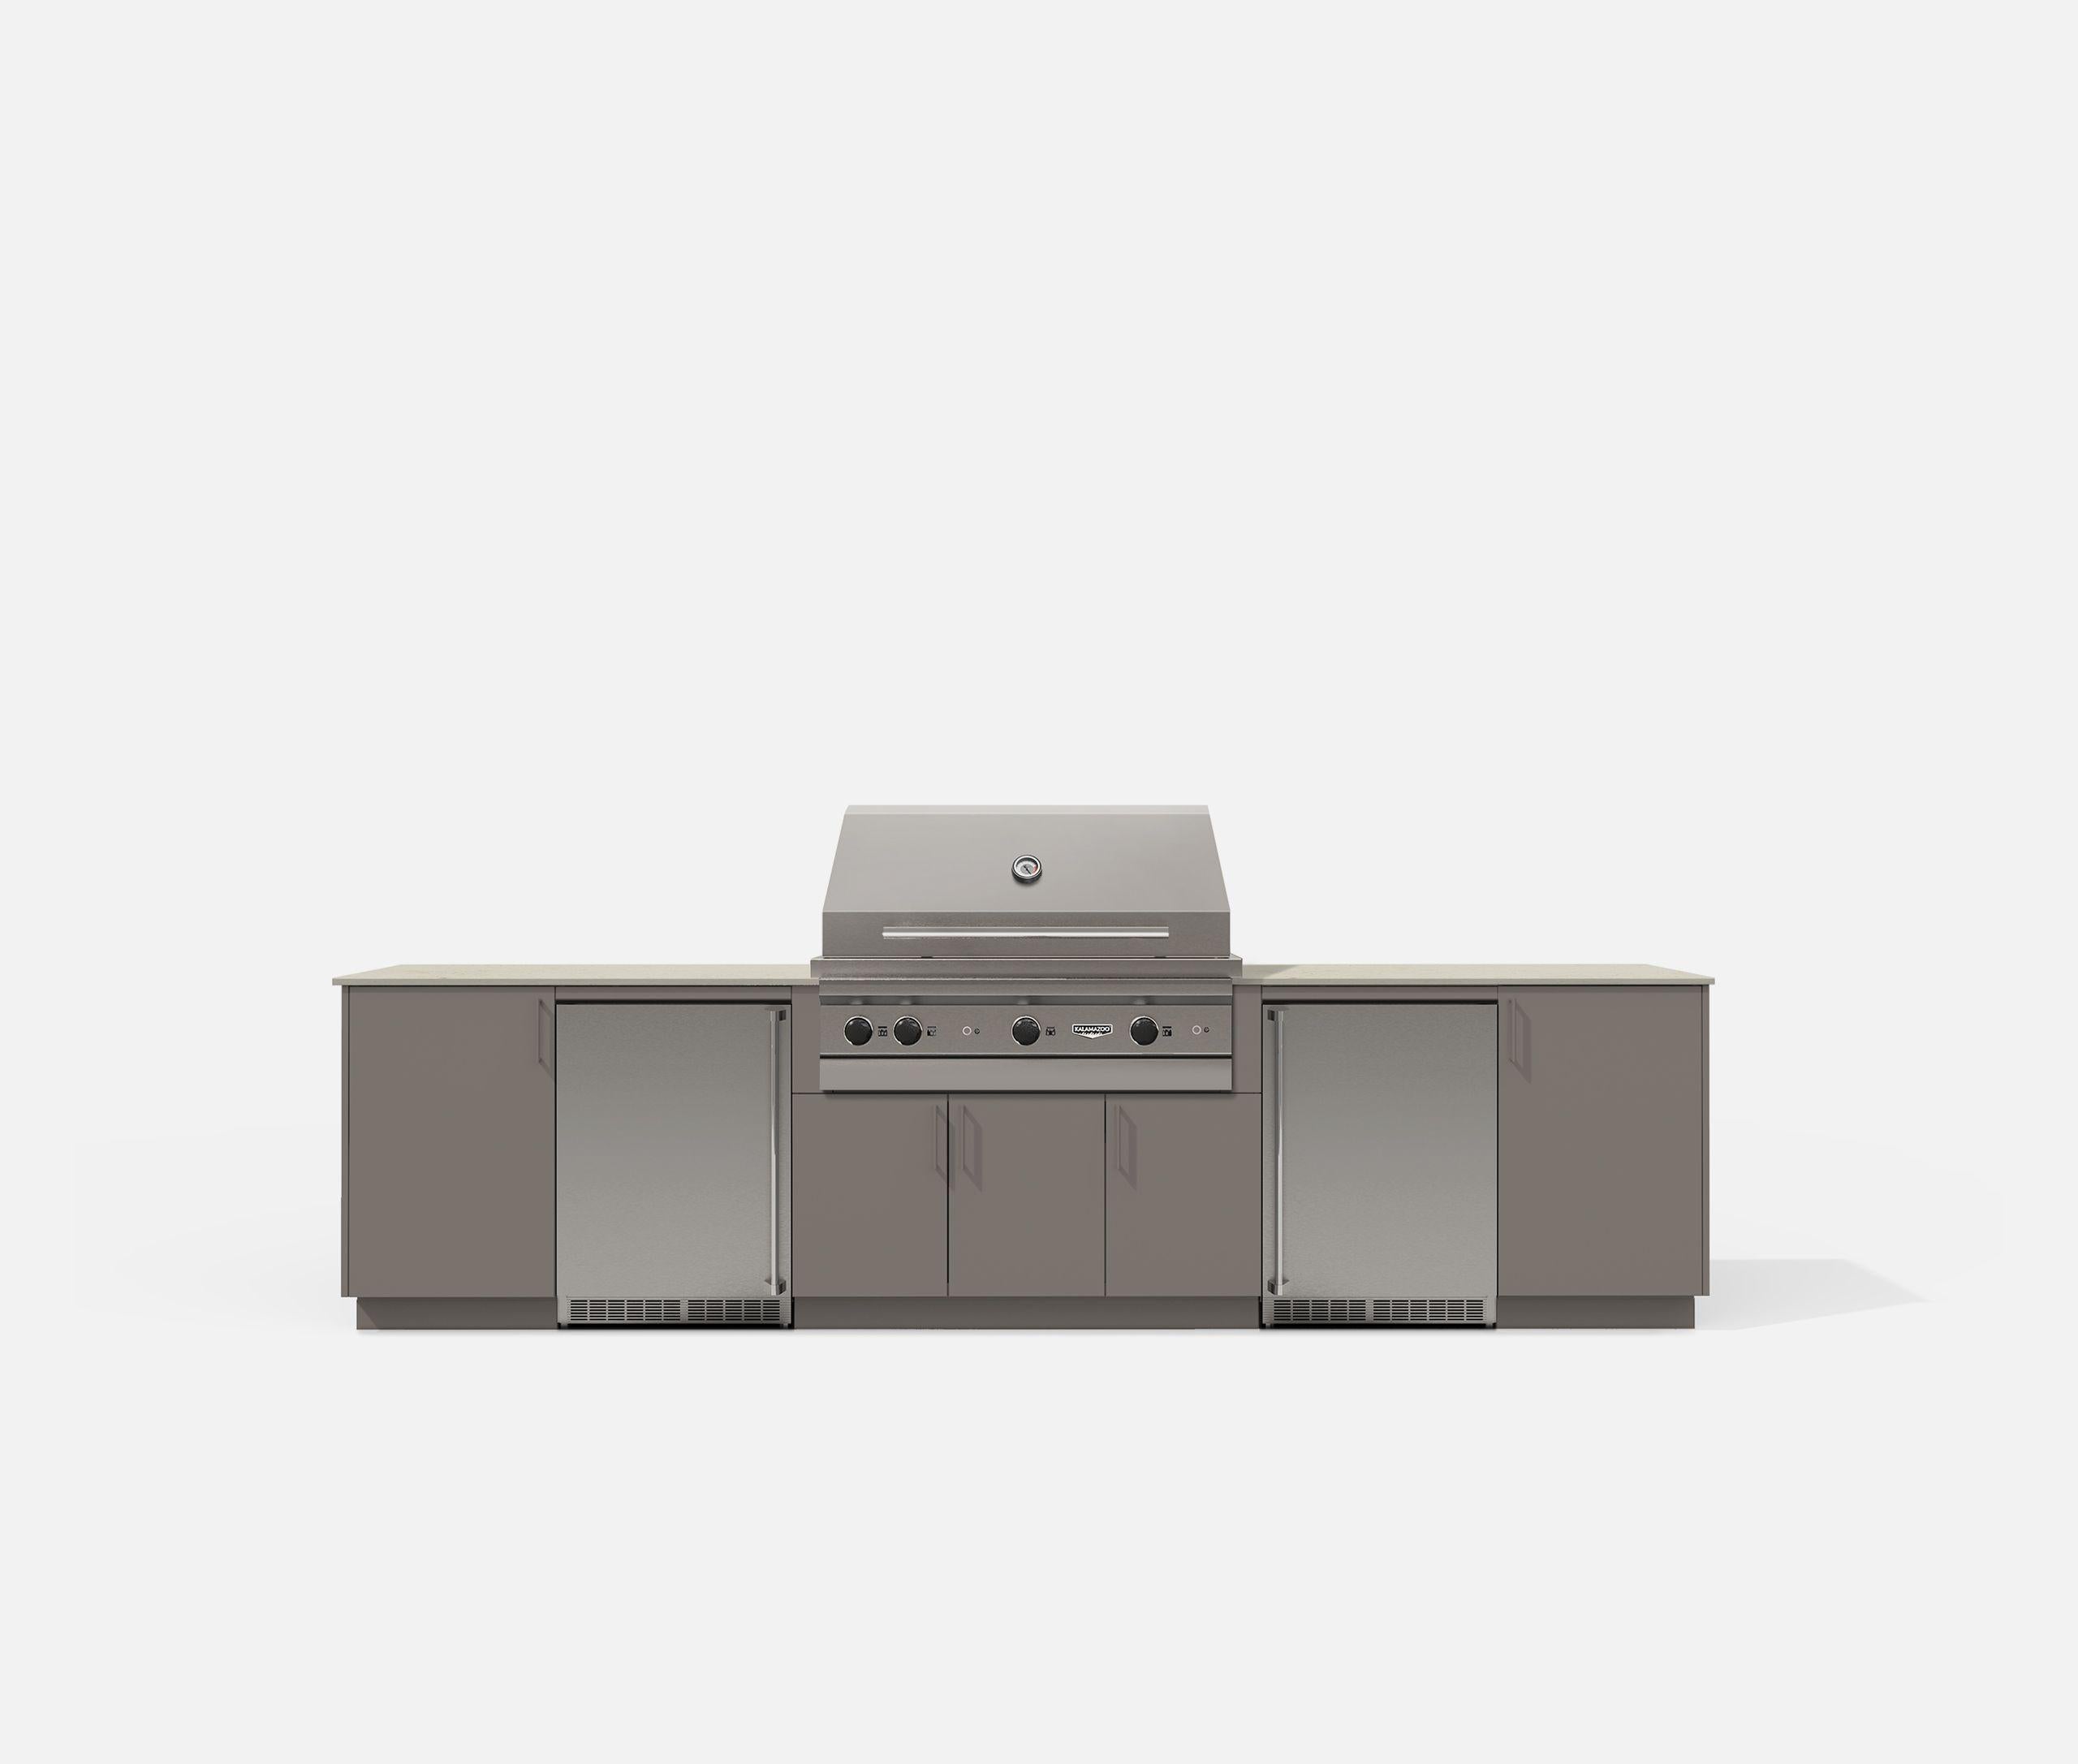 Urban Bonfire CTUNDRA42CLAY Tundra 42 Outdoor Kitchen (Clay) GRILL SOLD SEPARATELY